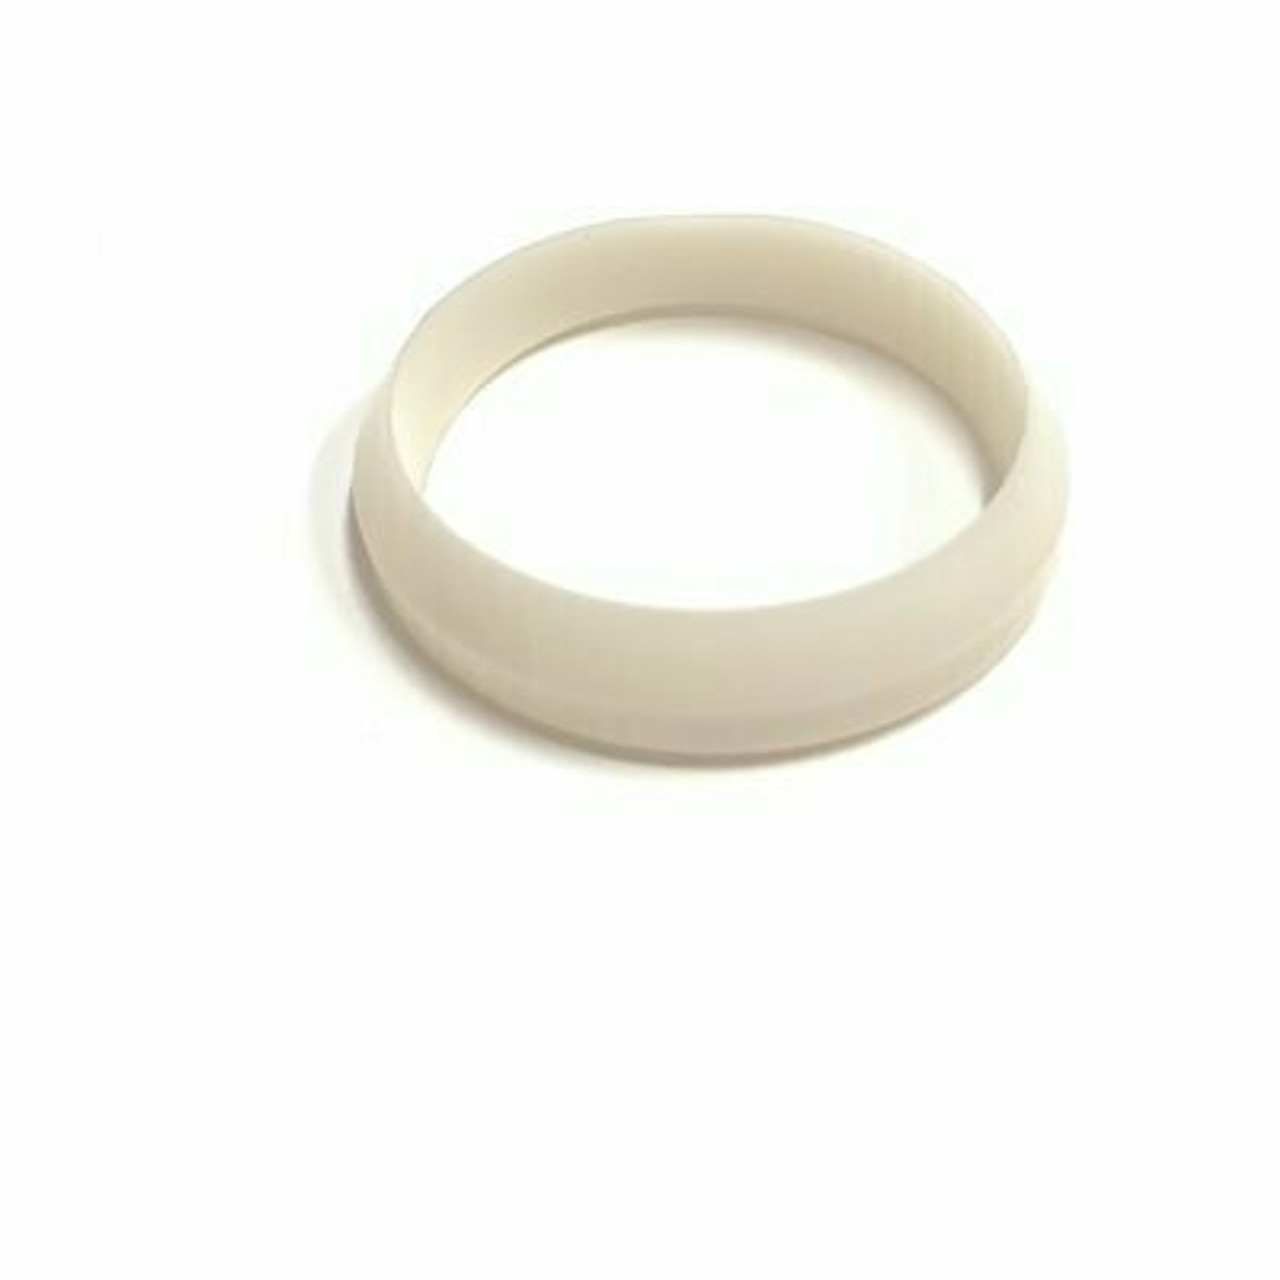 Sioux Chief 1-1/4 In. Drip-Free Sj Washer